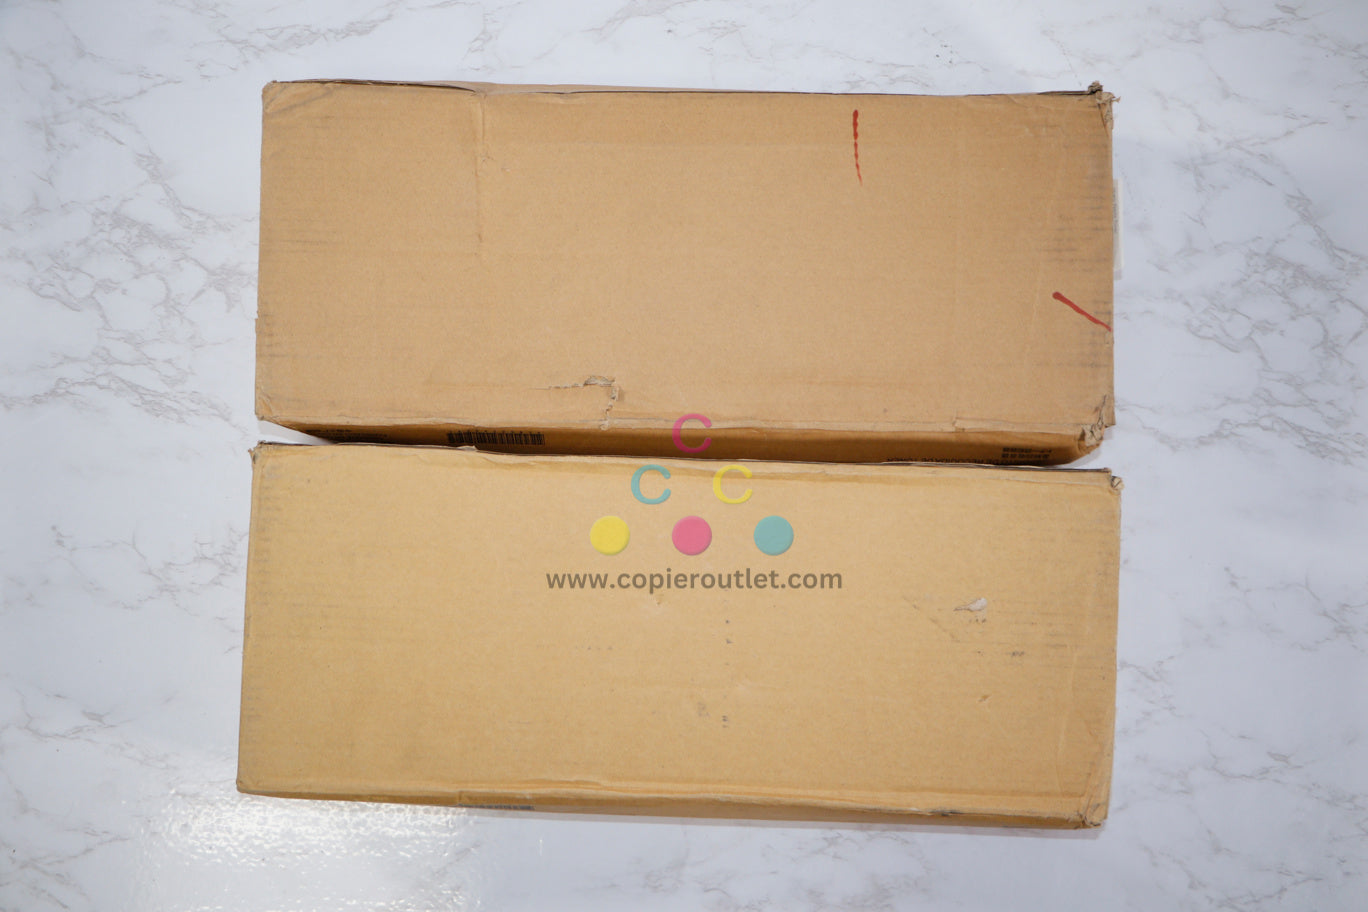 2 Cosmetic OEM Sharp MX-2630N,MX-3050N Toner Collection Containers MX-607HB